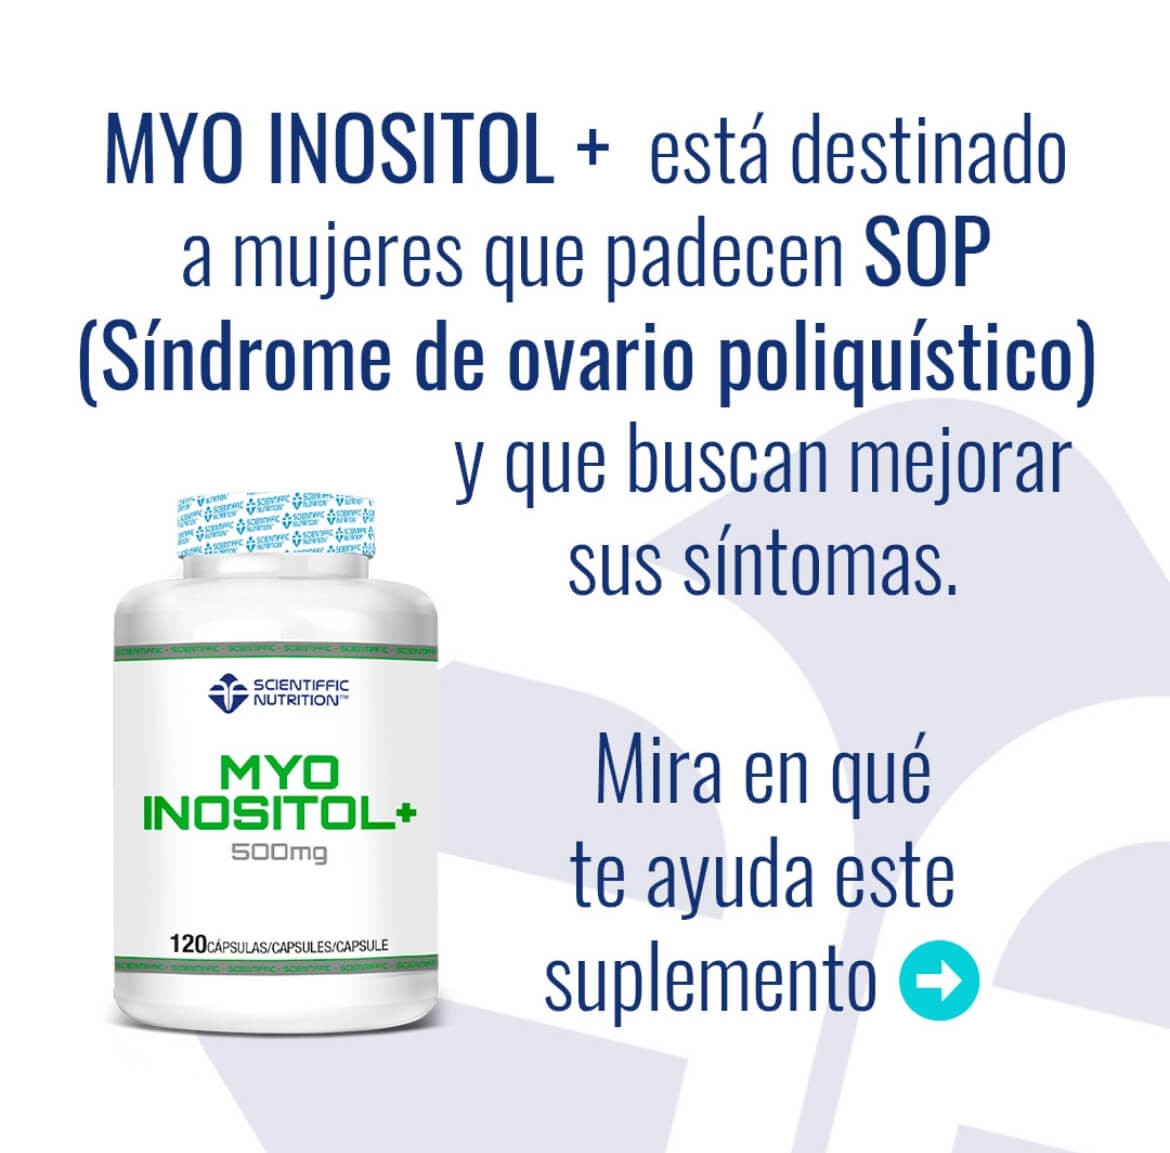 myo-inositol: The Sports Supplement that Boosts Your Performance and Well-being